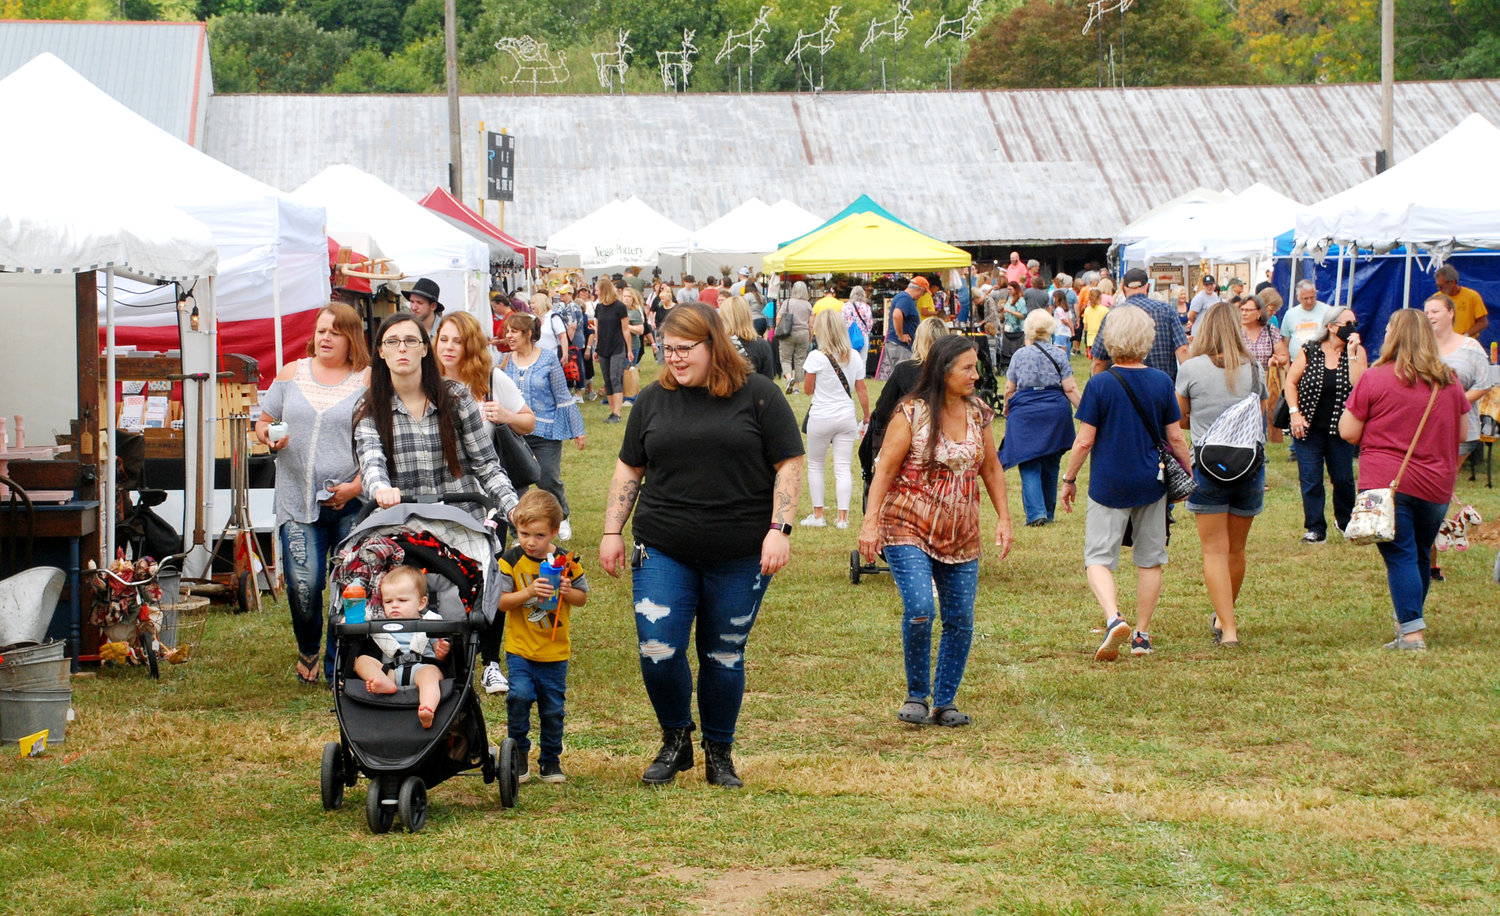 THE OZARK ARTS AND CRAFTS FAIR was canceled in 2020 due to the public health concerns of the COVID-19 pandemic, but the event returned and brought thousands of guests to Ozark in 2021.